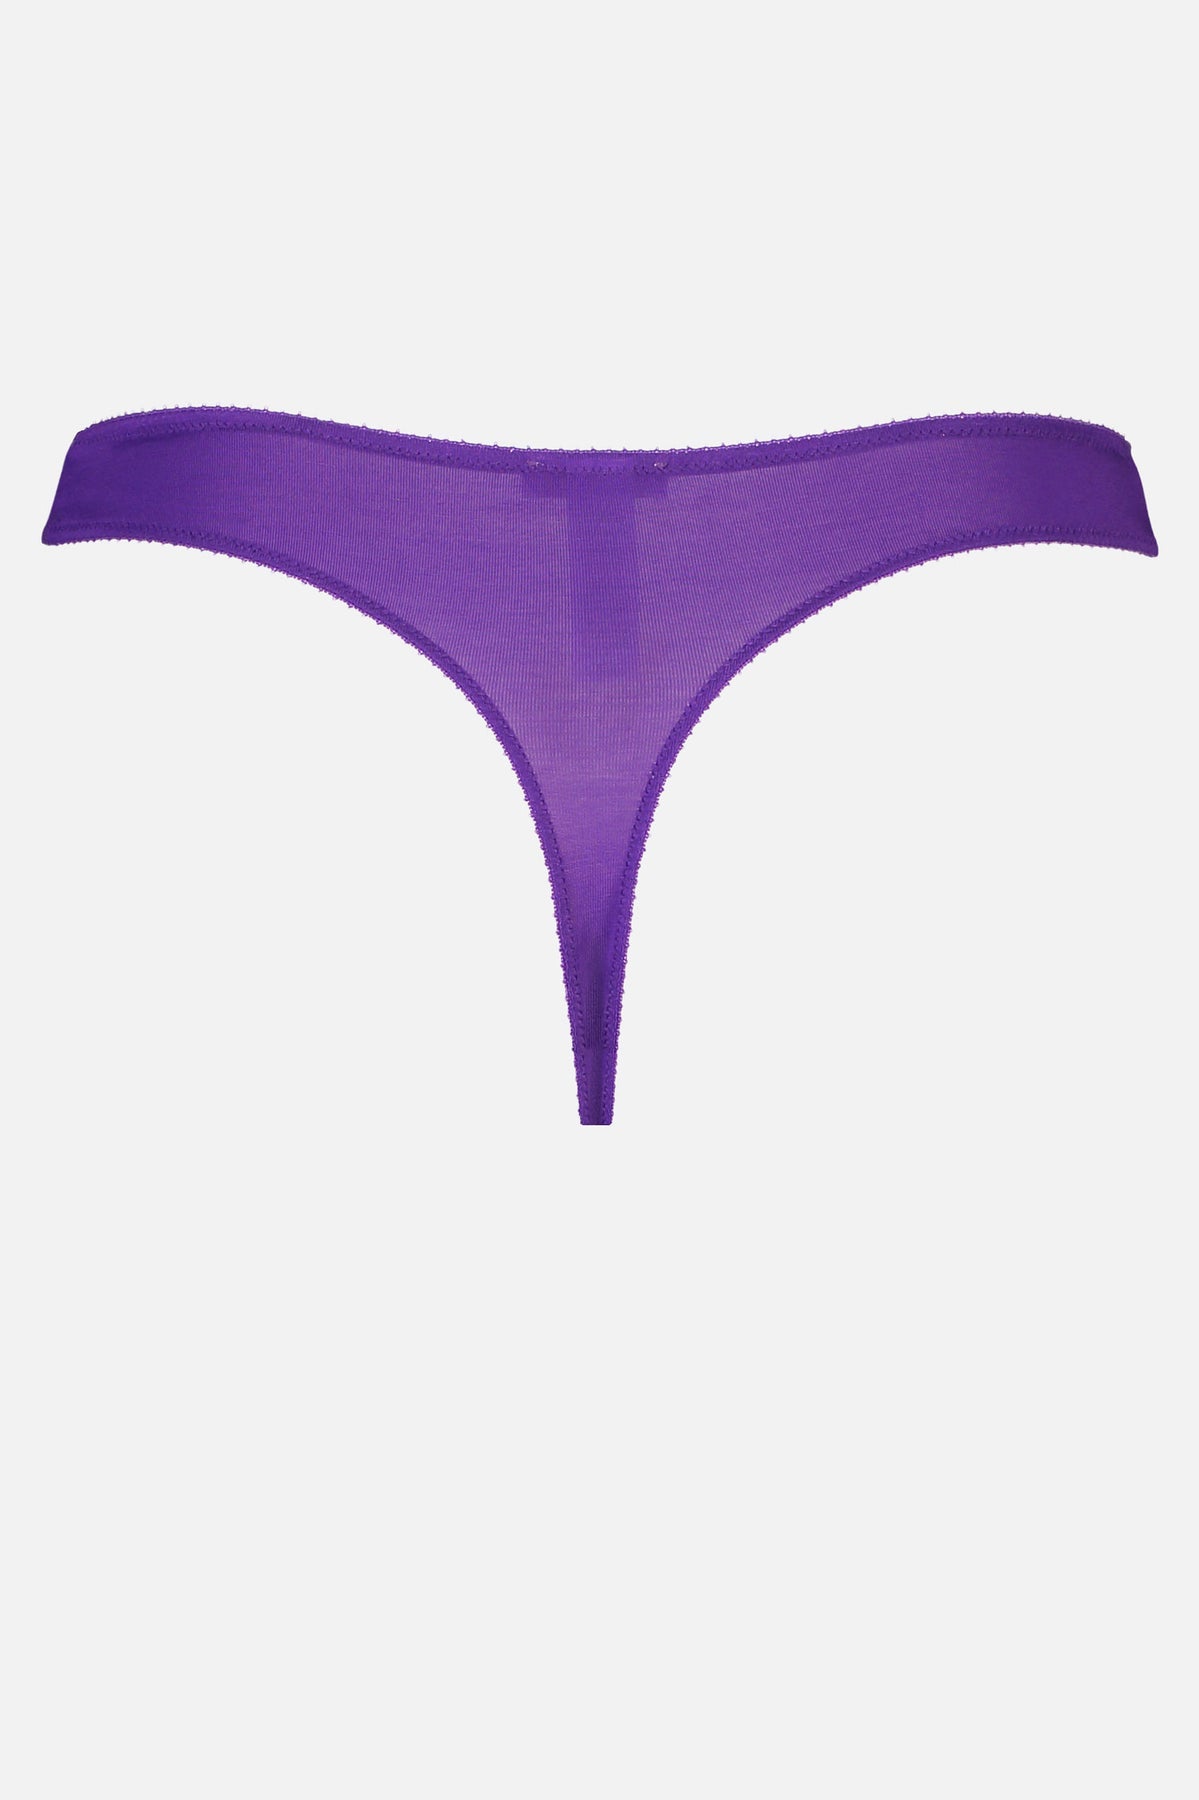 Whitney Thong in Future